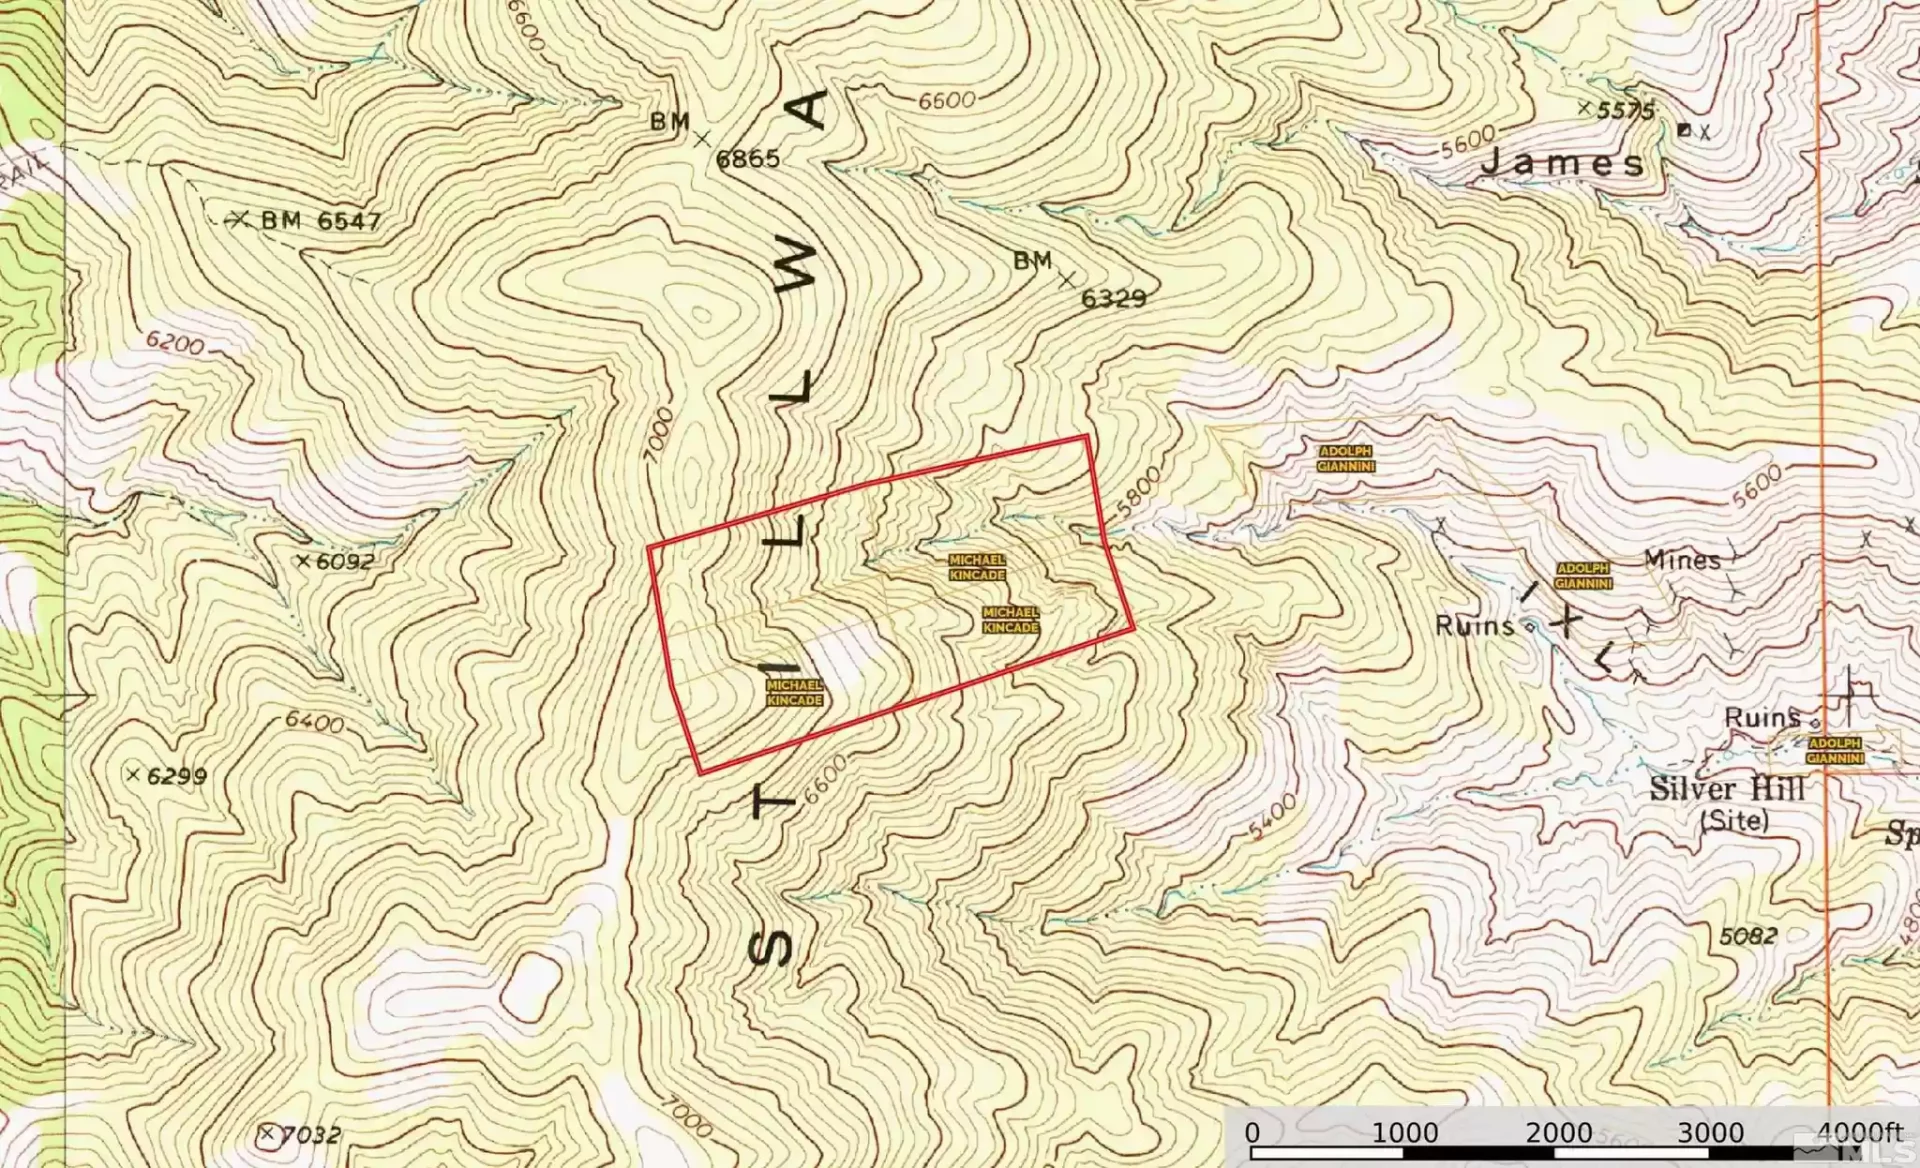 98.058 ACRES~6 Patented Mining Claims BLACK PRINCE, SUR 1877 All Adjoining Dating back to 1877 Totalling 98.058 Acres inside Stillwater Range Wilderness Area, Churchill Co, Nevada photo 25